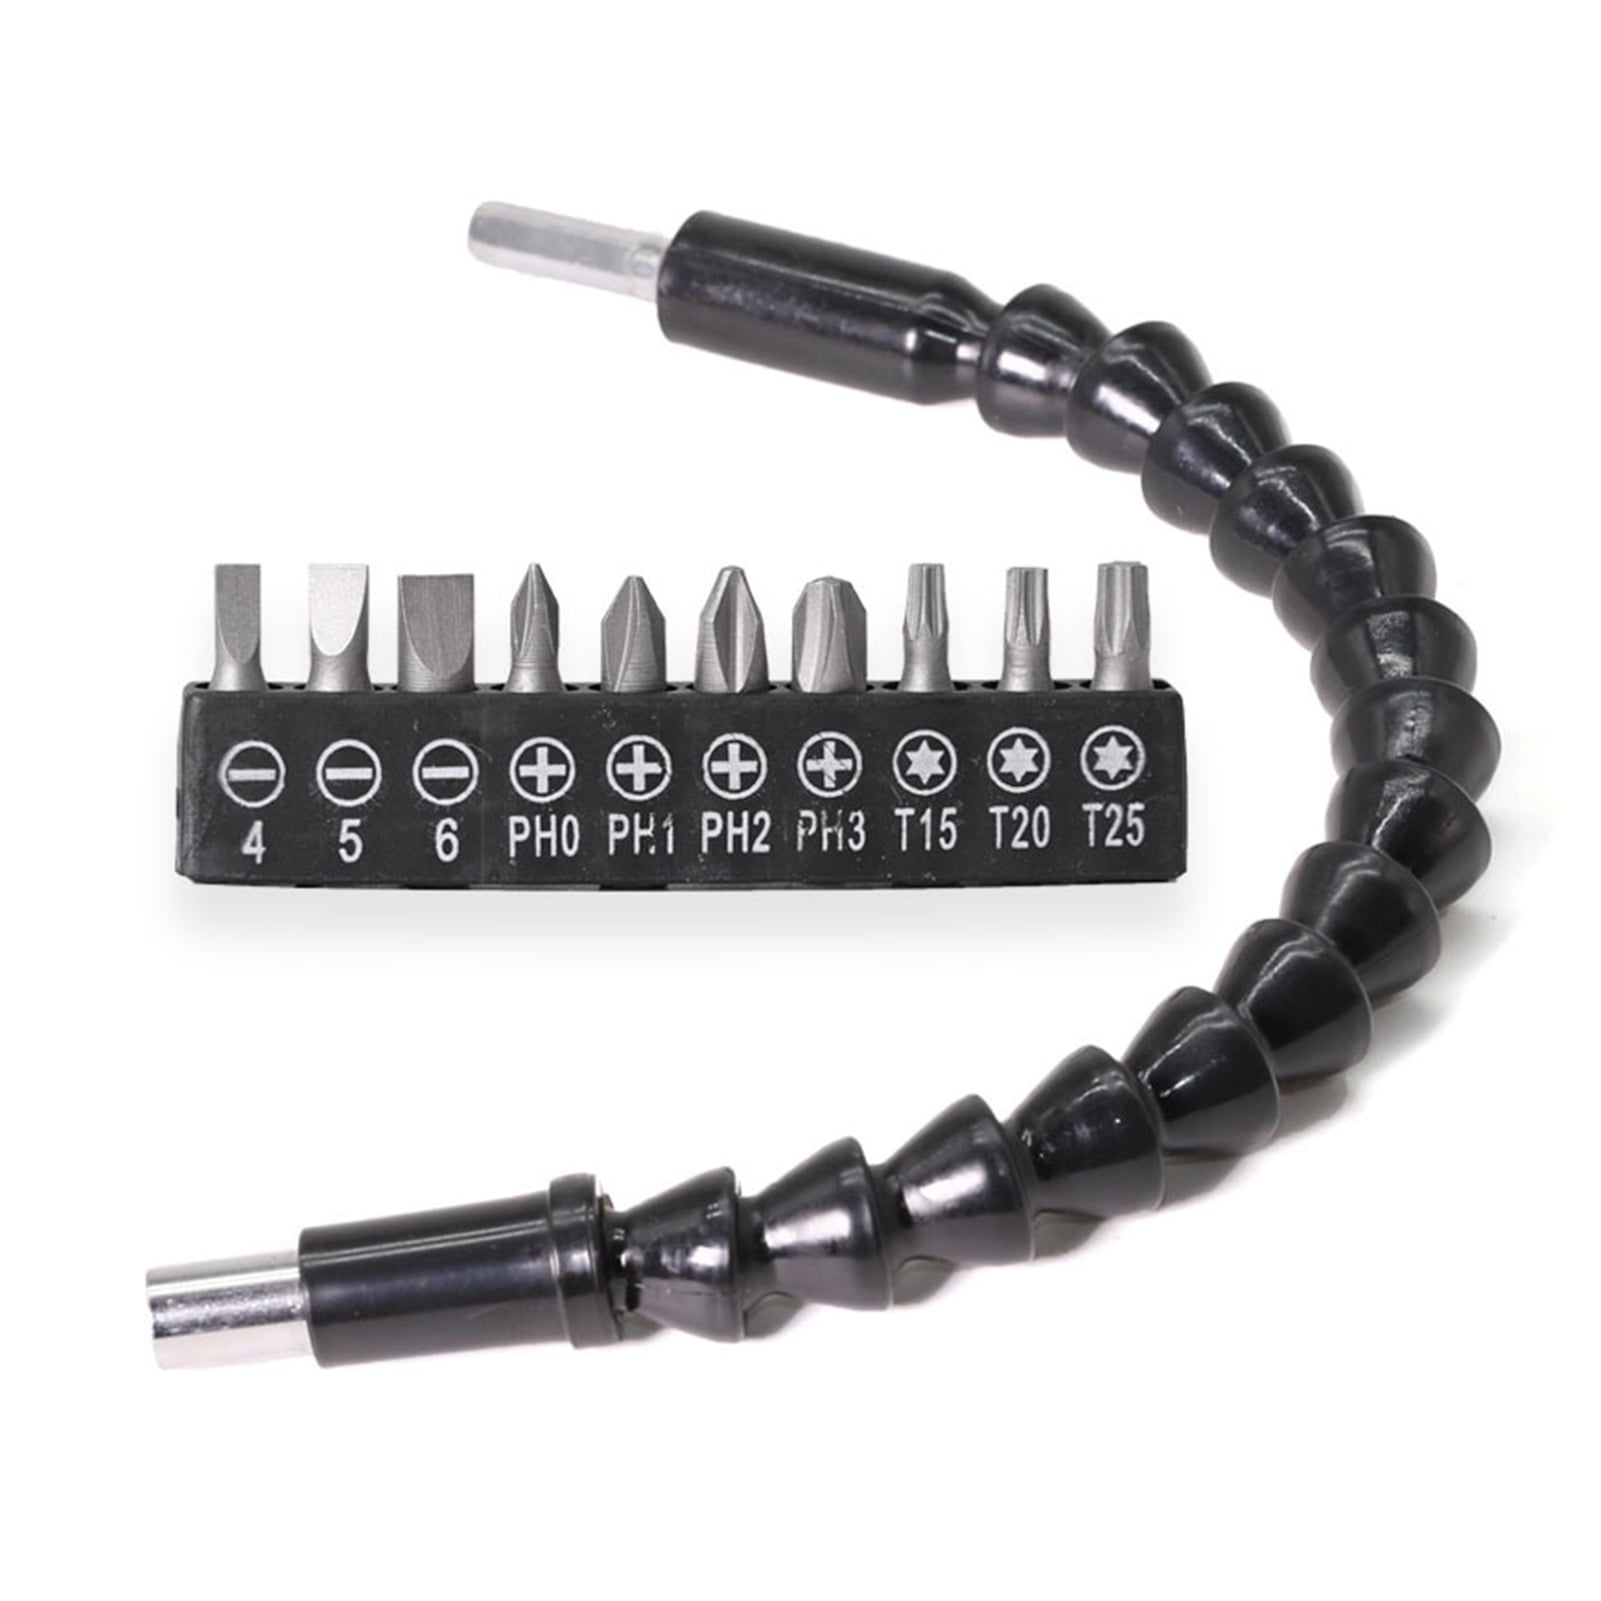 1pc 1/4 Flexible Extension Drill,Shaft Drill Bit Holder Shaft,for Electronic Drill Screwdriver 400MM 